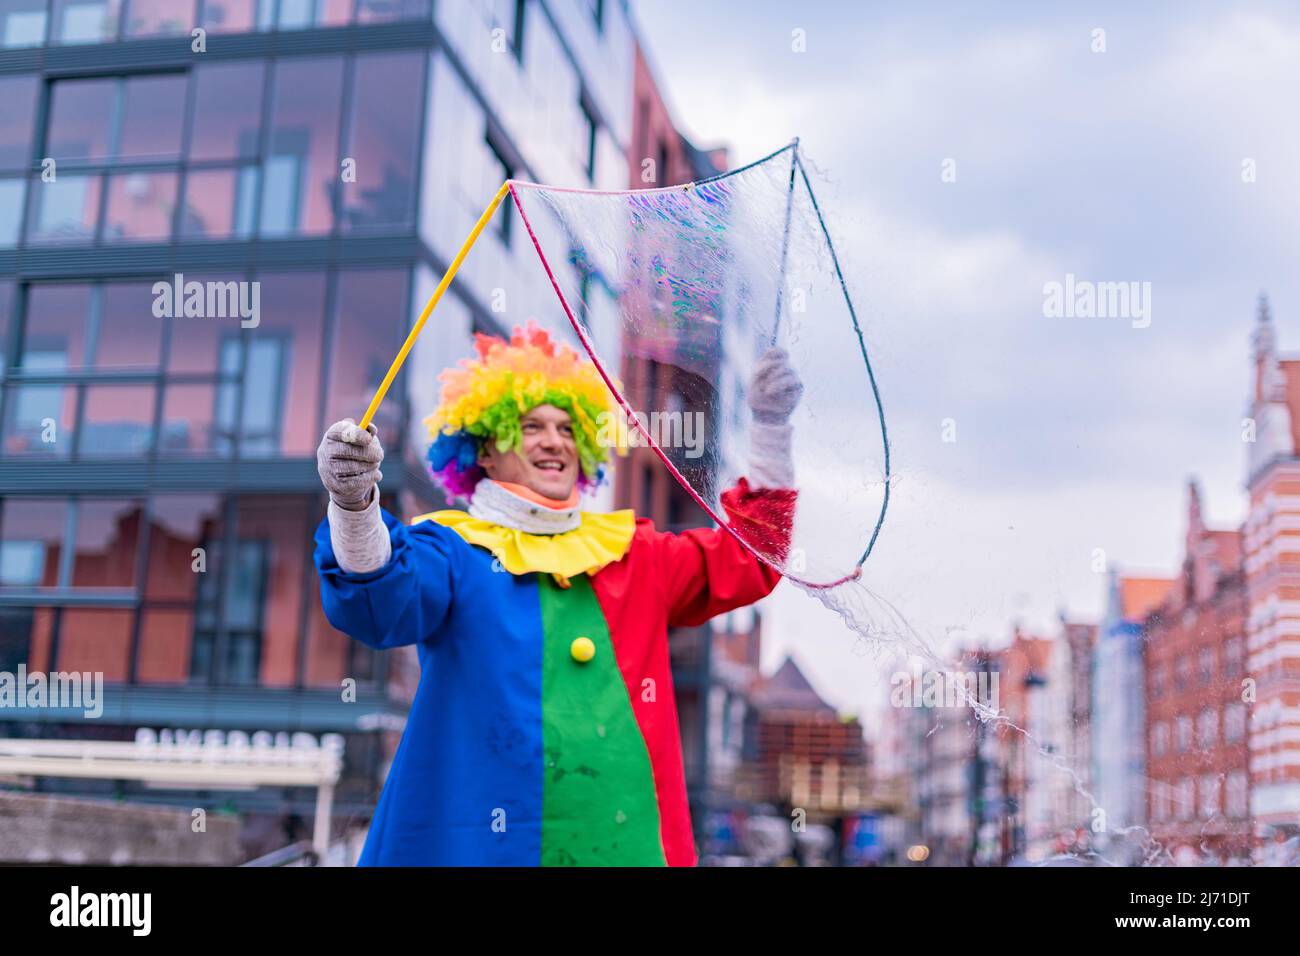 Gdansk,PL-16 Mar 22: Clown creating huge and bright soap bubbles in the air. Colorful clown providing entertainment for passing through people on the Stock Photo